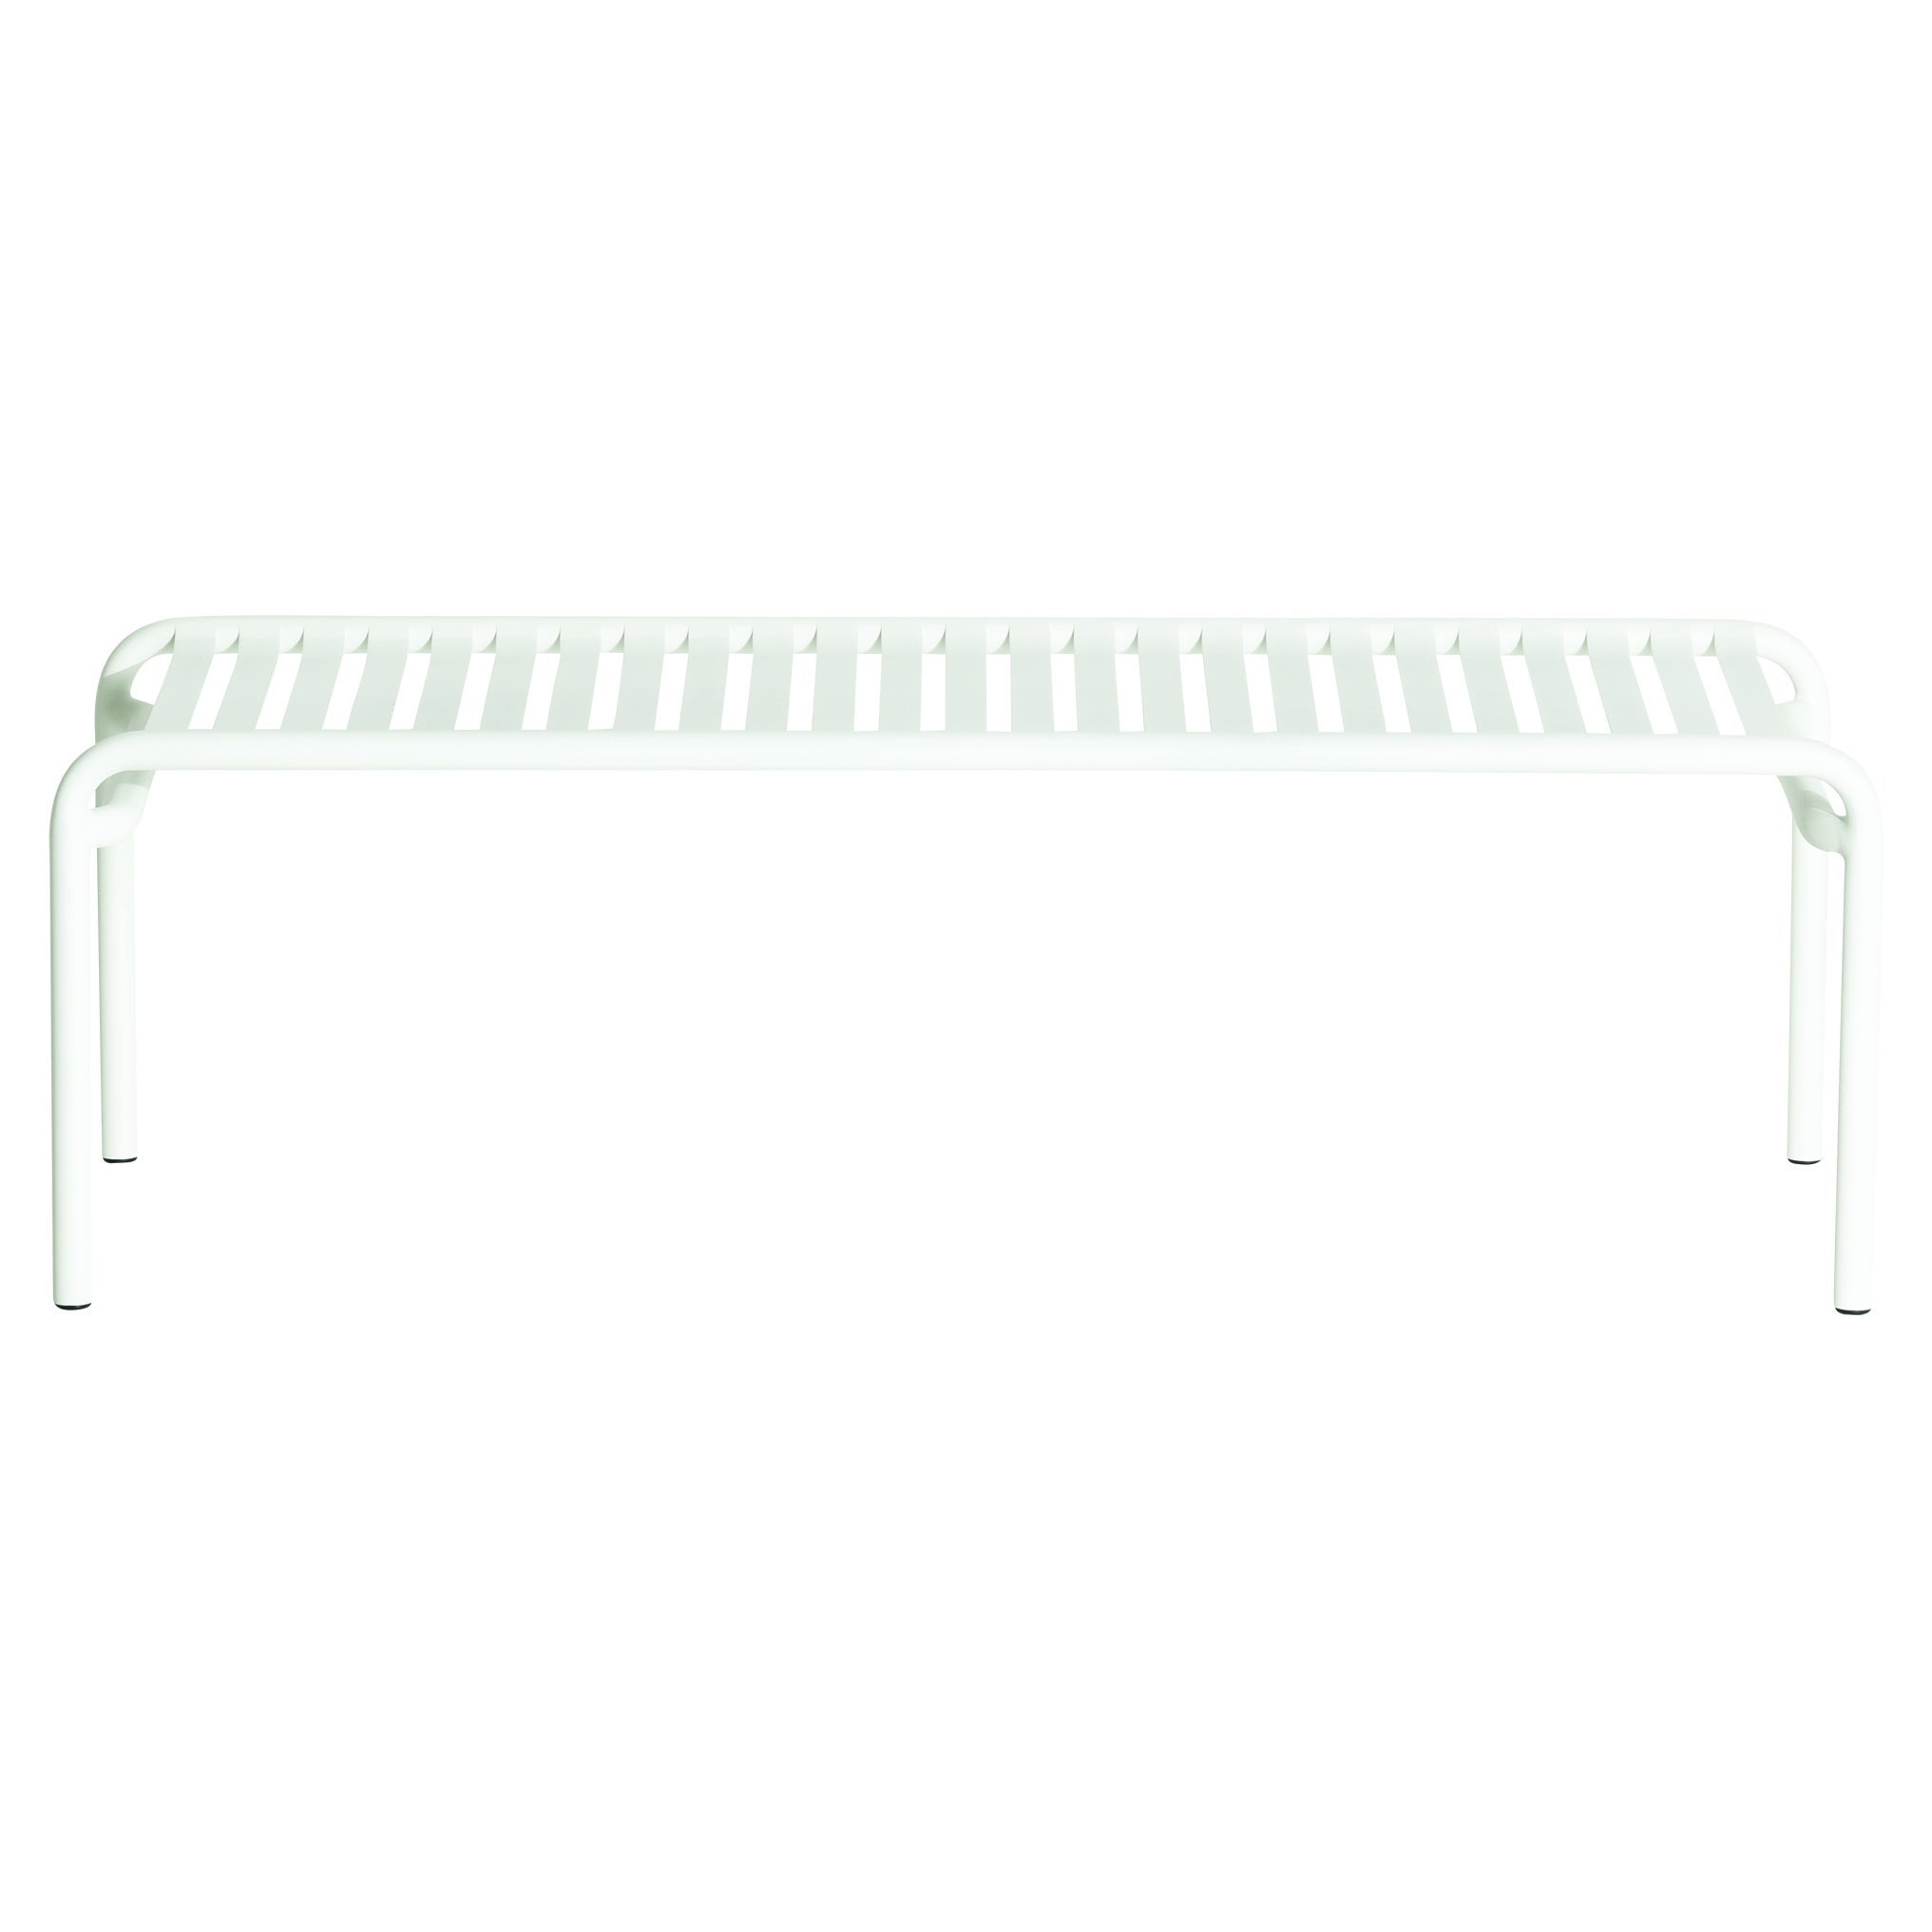 Petite Friture Week-End Long Coffee Table in White Aluminium, 2017